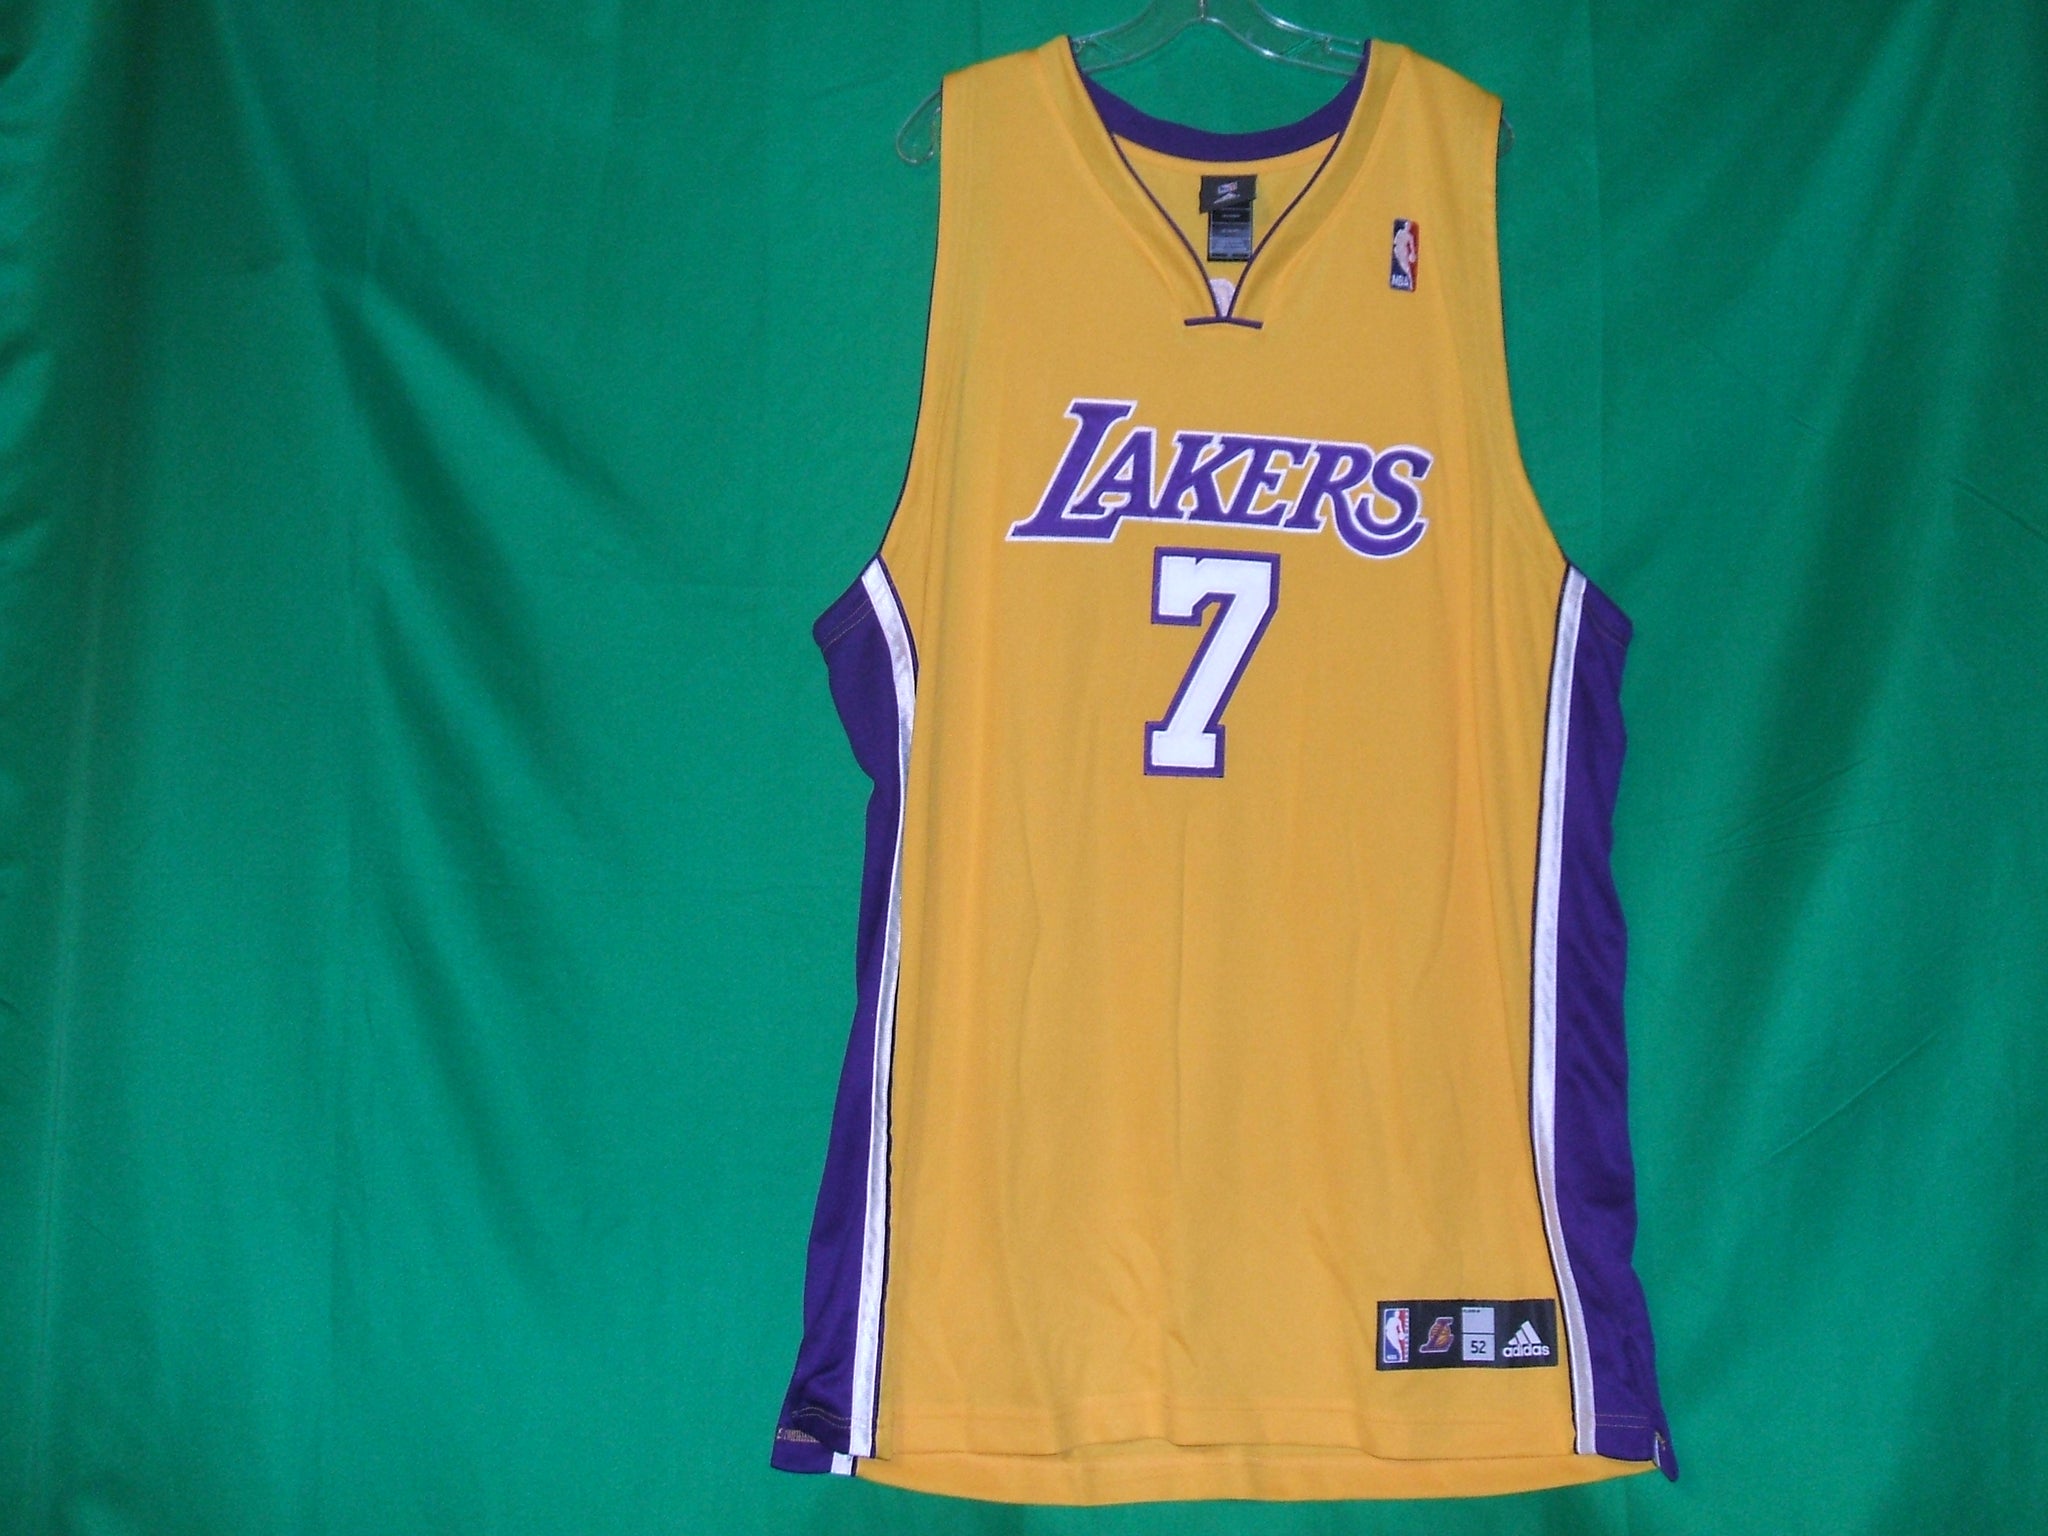 ANDREW BYNUM Los Angeles LAKERS Basketball ADIDAS s Jersey yellow